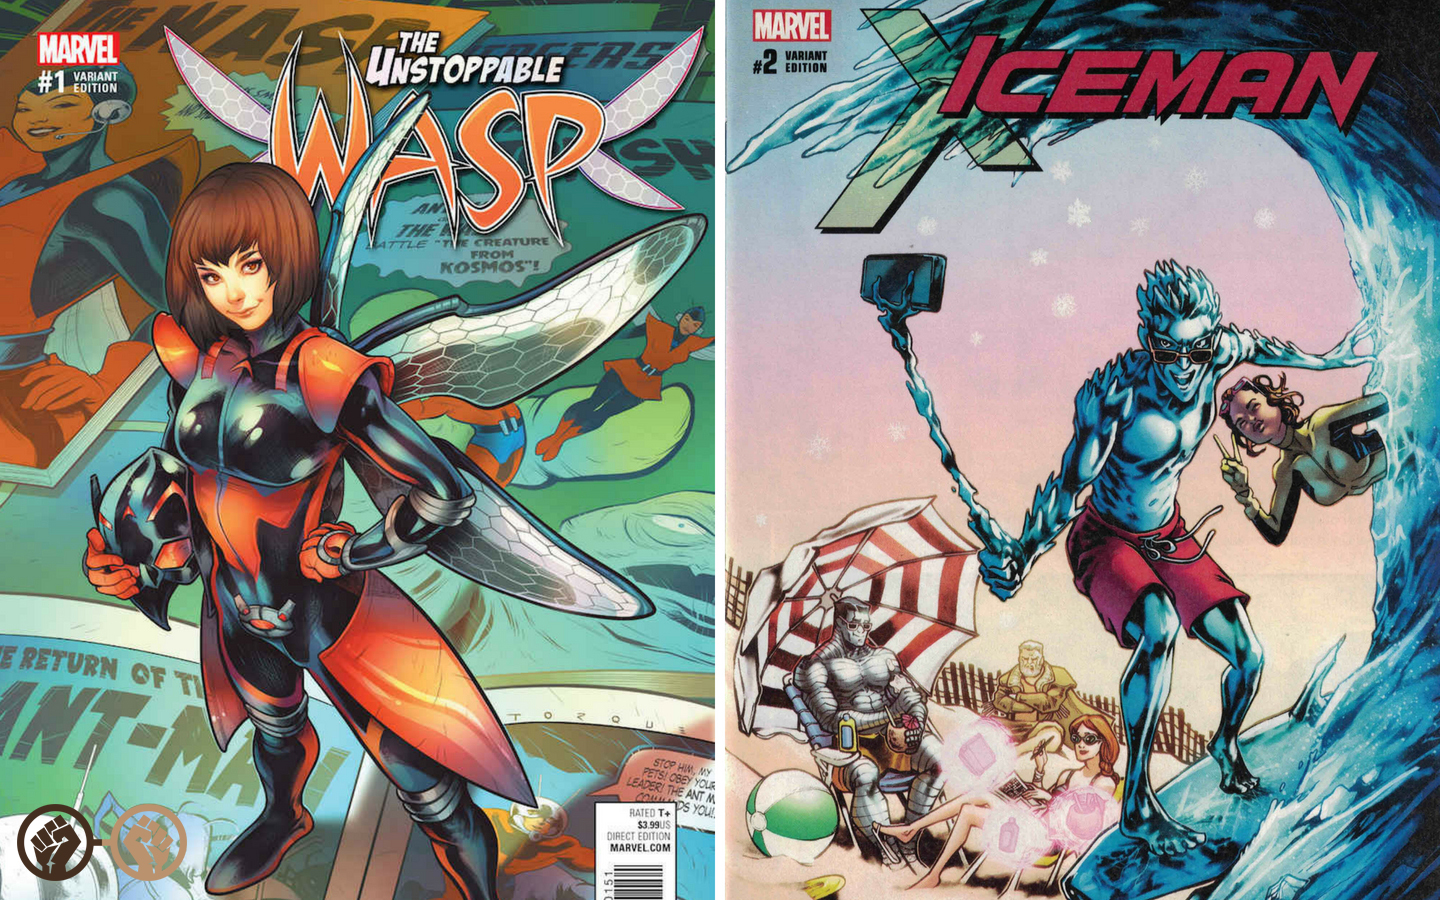 Marvel Revives ‘Wasp’ & ‘Iceman’ Comic Books